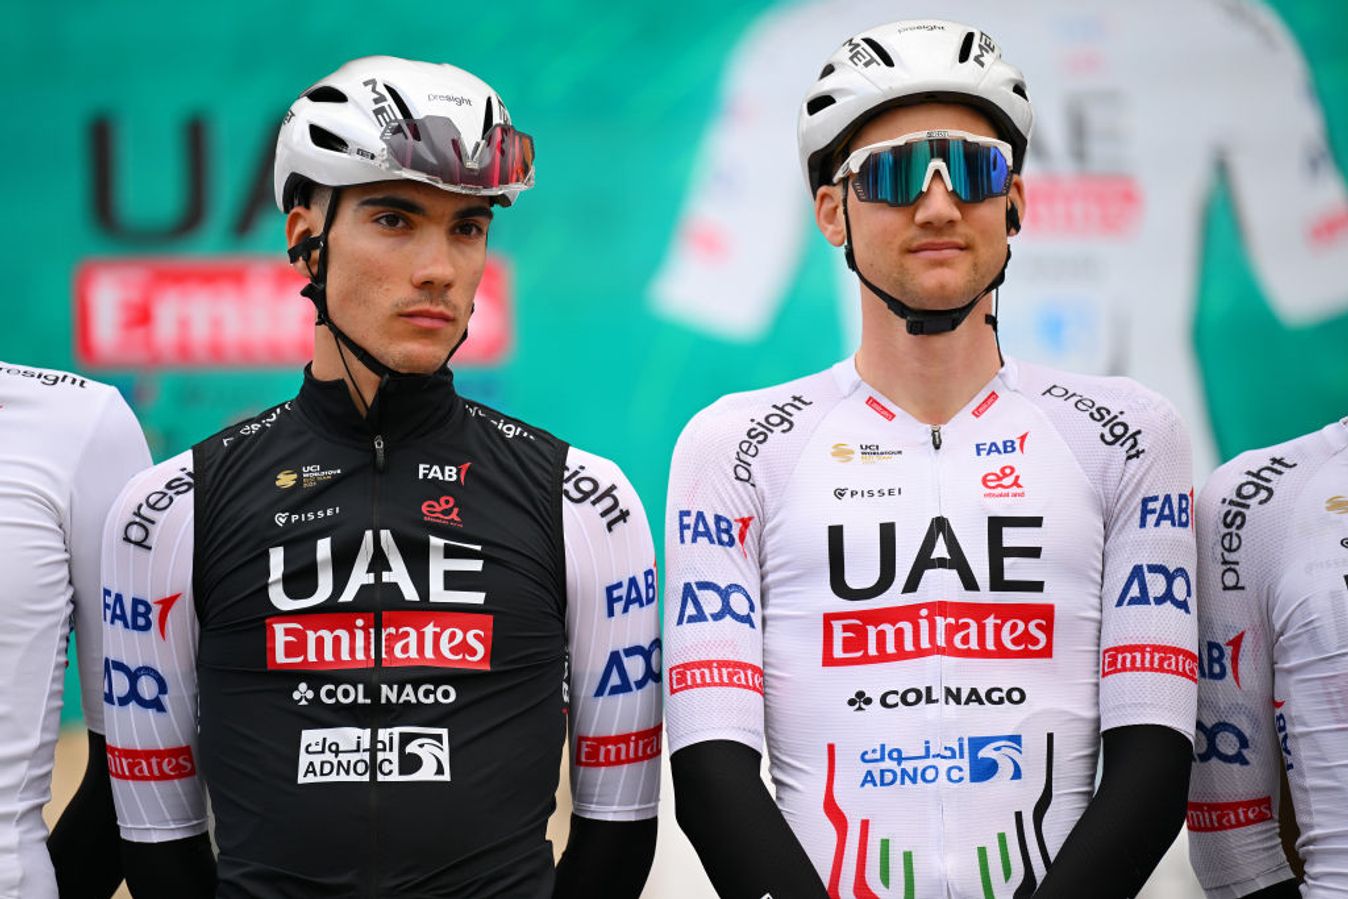 Ayuso will be a domestique de luxe but also possible back-up plan at the Tour de France